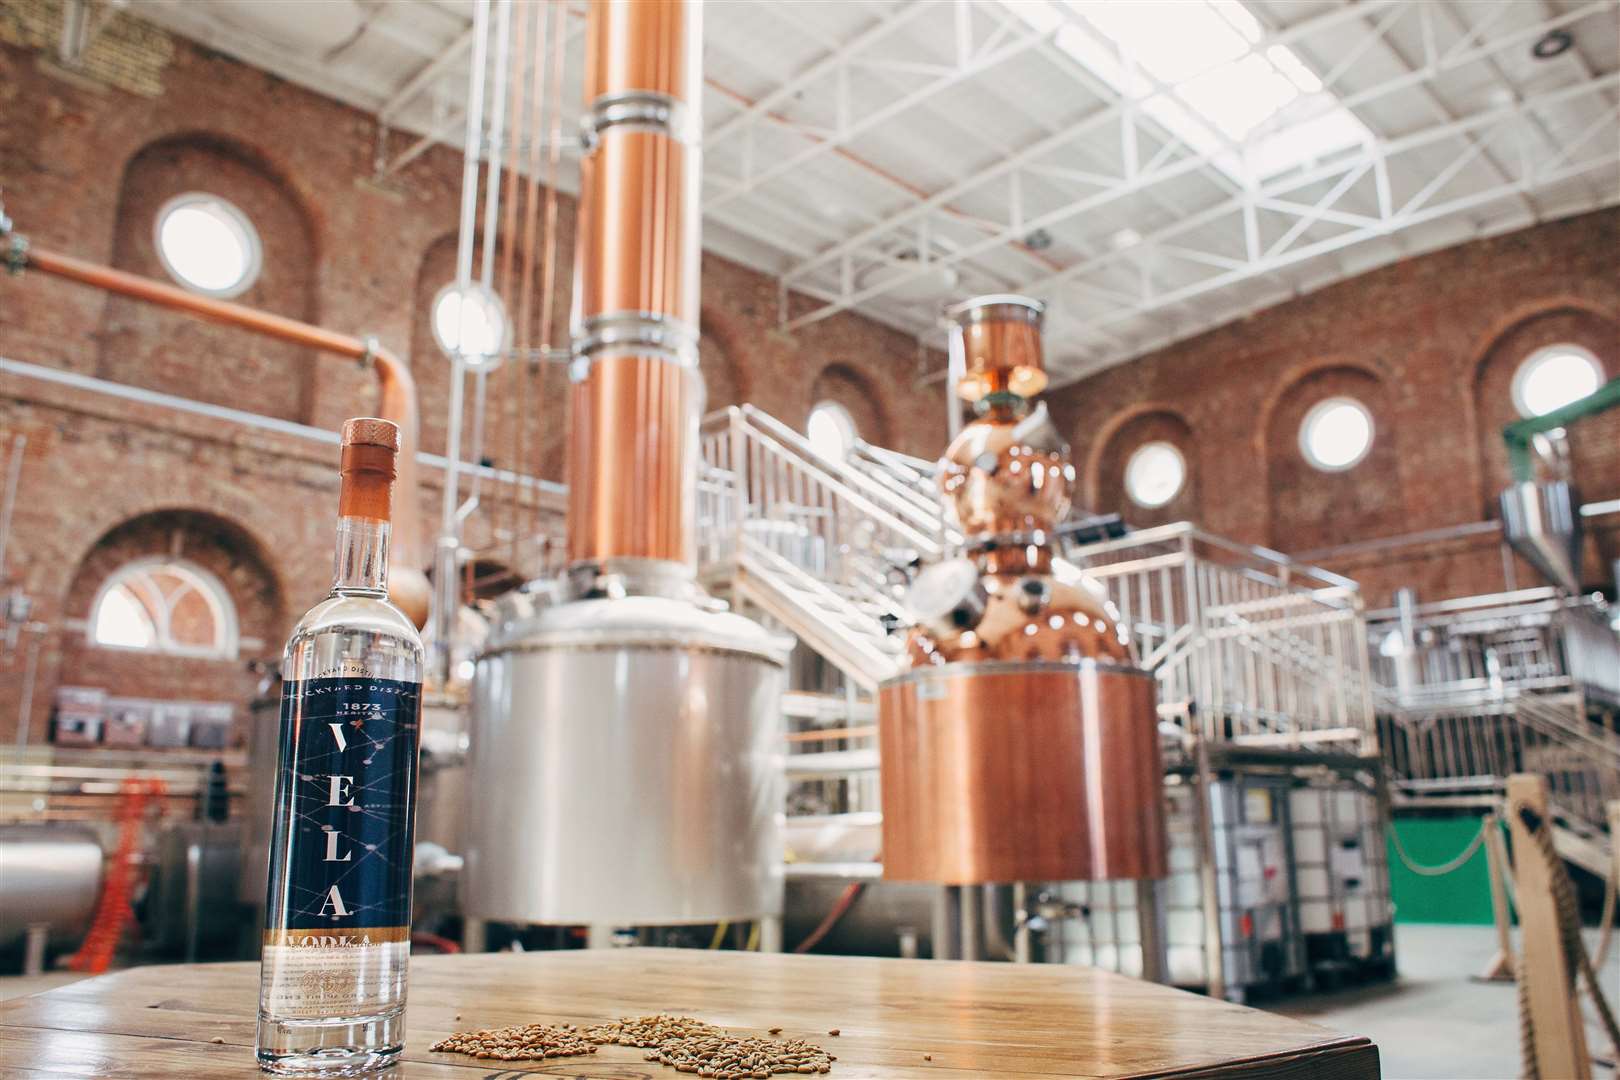 Copper Rivet Distillery has won a double gold for its Vela Vodka at the 17th San Francisco World Spirits Competition